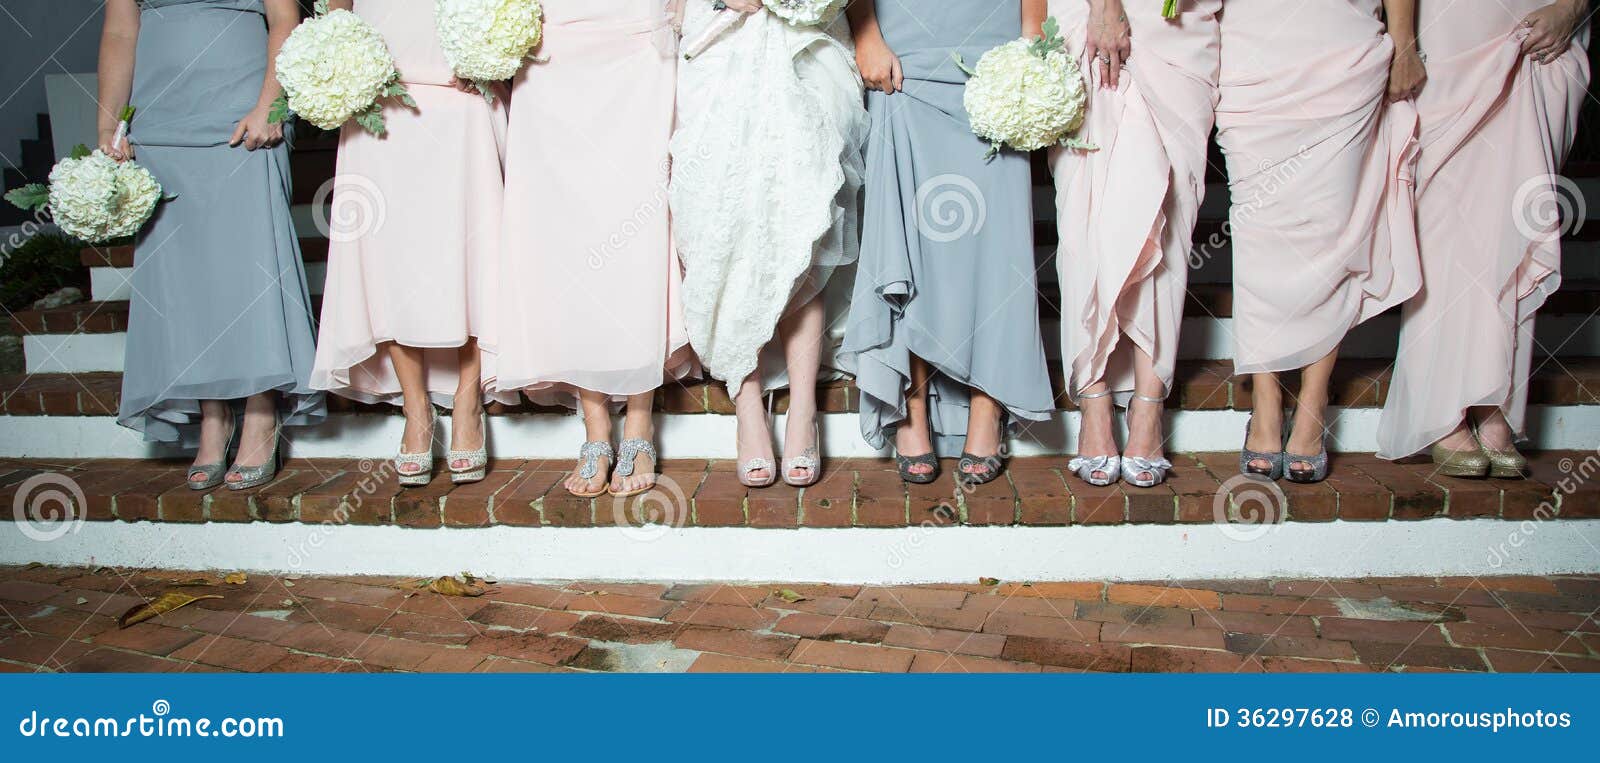 bride and bridesmaids show shoes